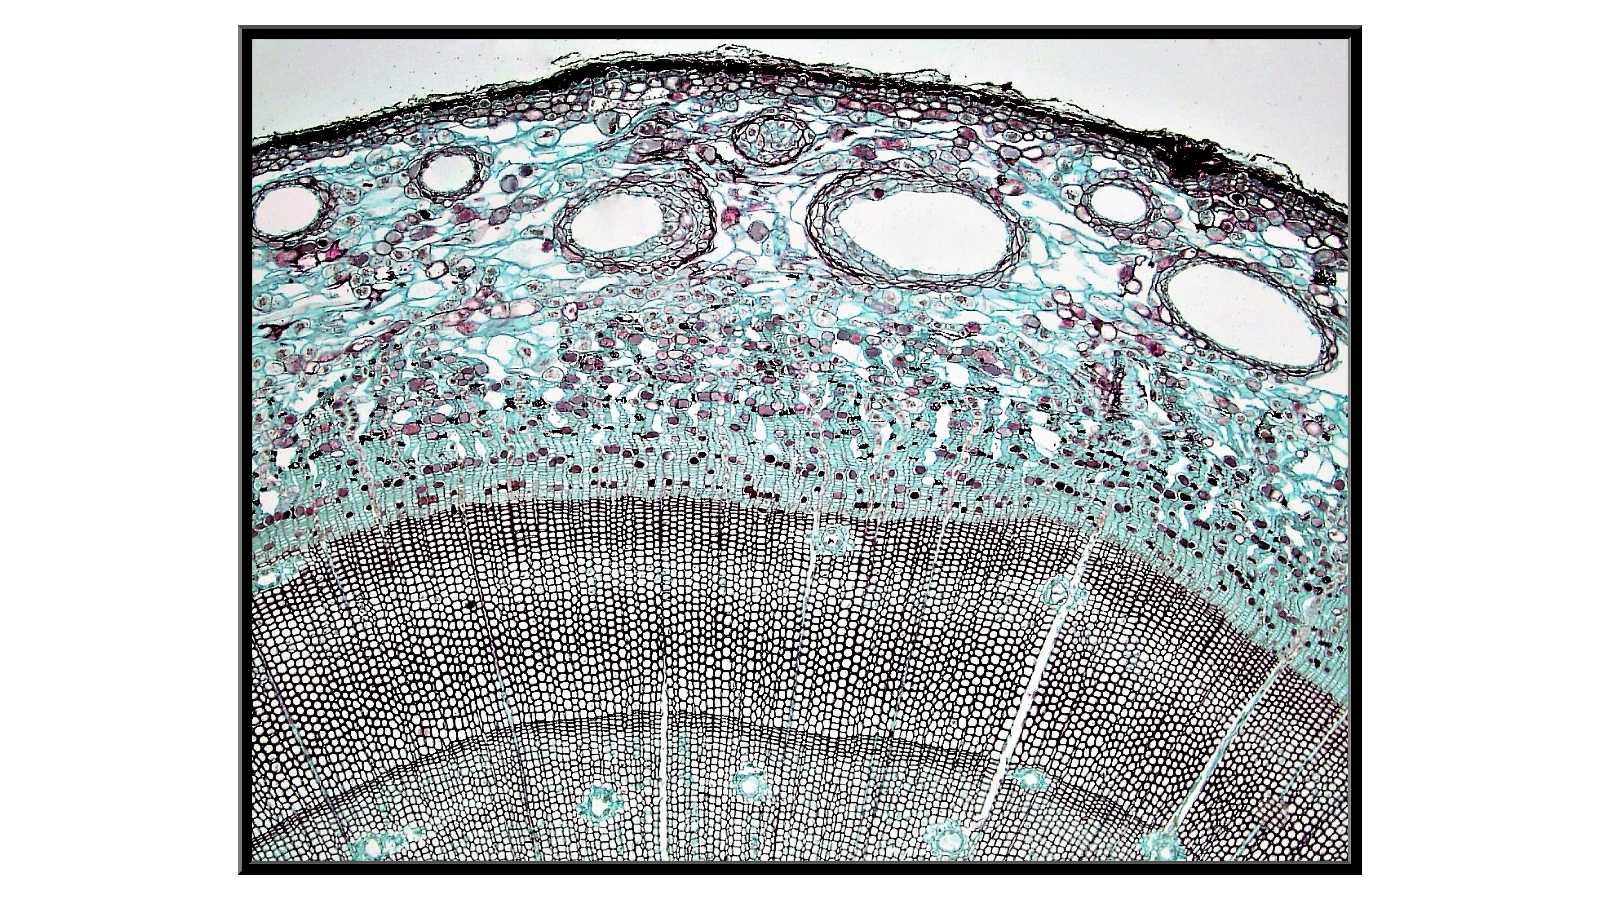 Cross-section of a 4-year-old pine stalk x40